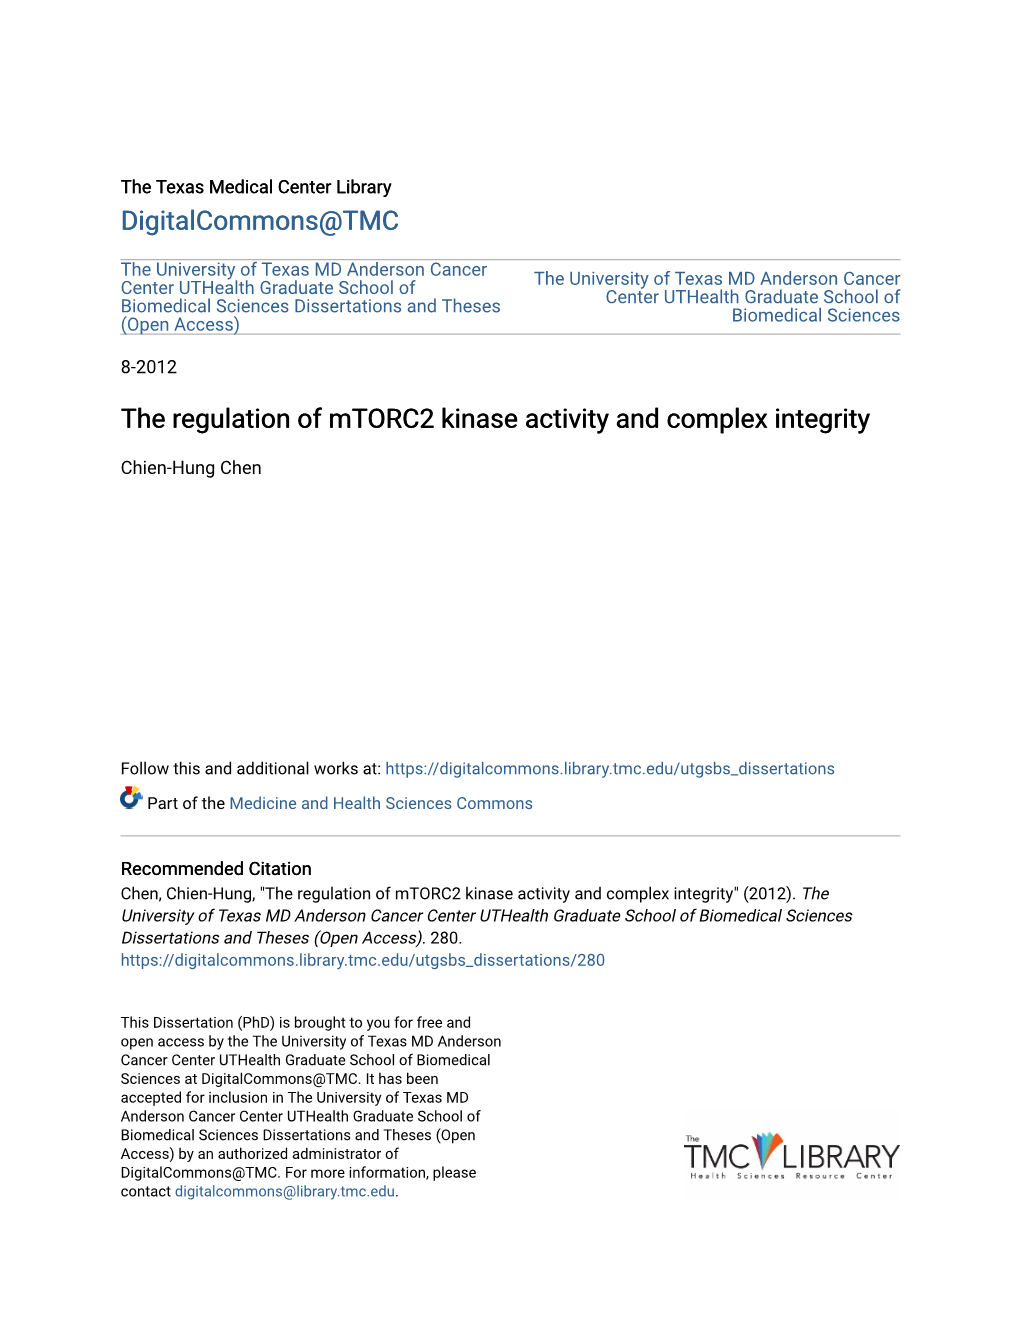 The Regulation of Mtorc2 Kinase Activity and Complex Integrity